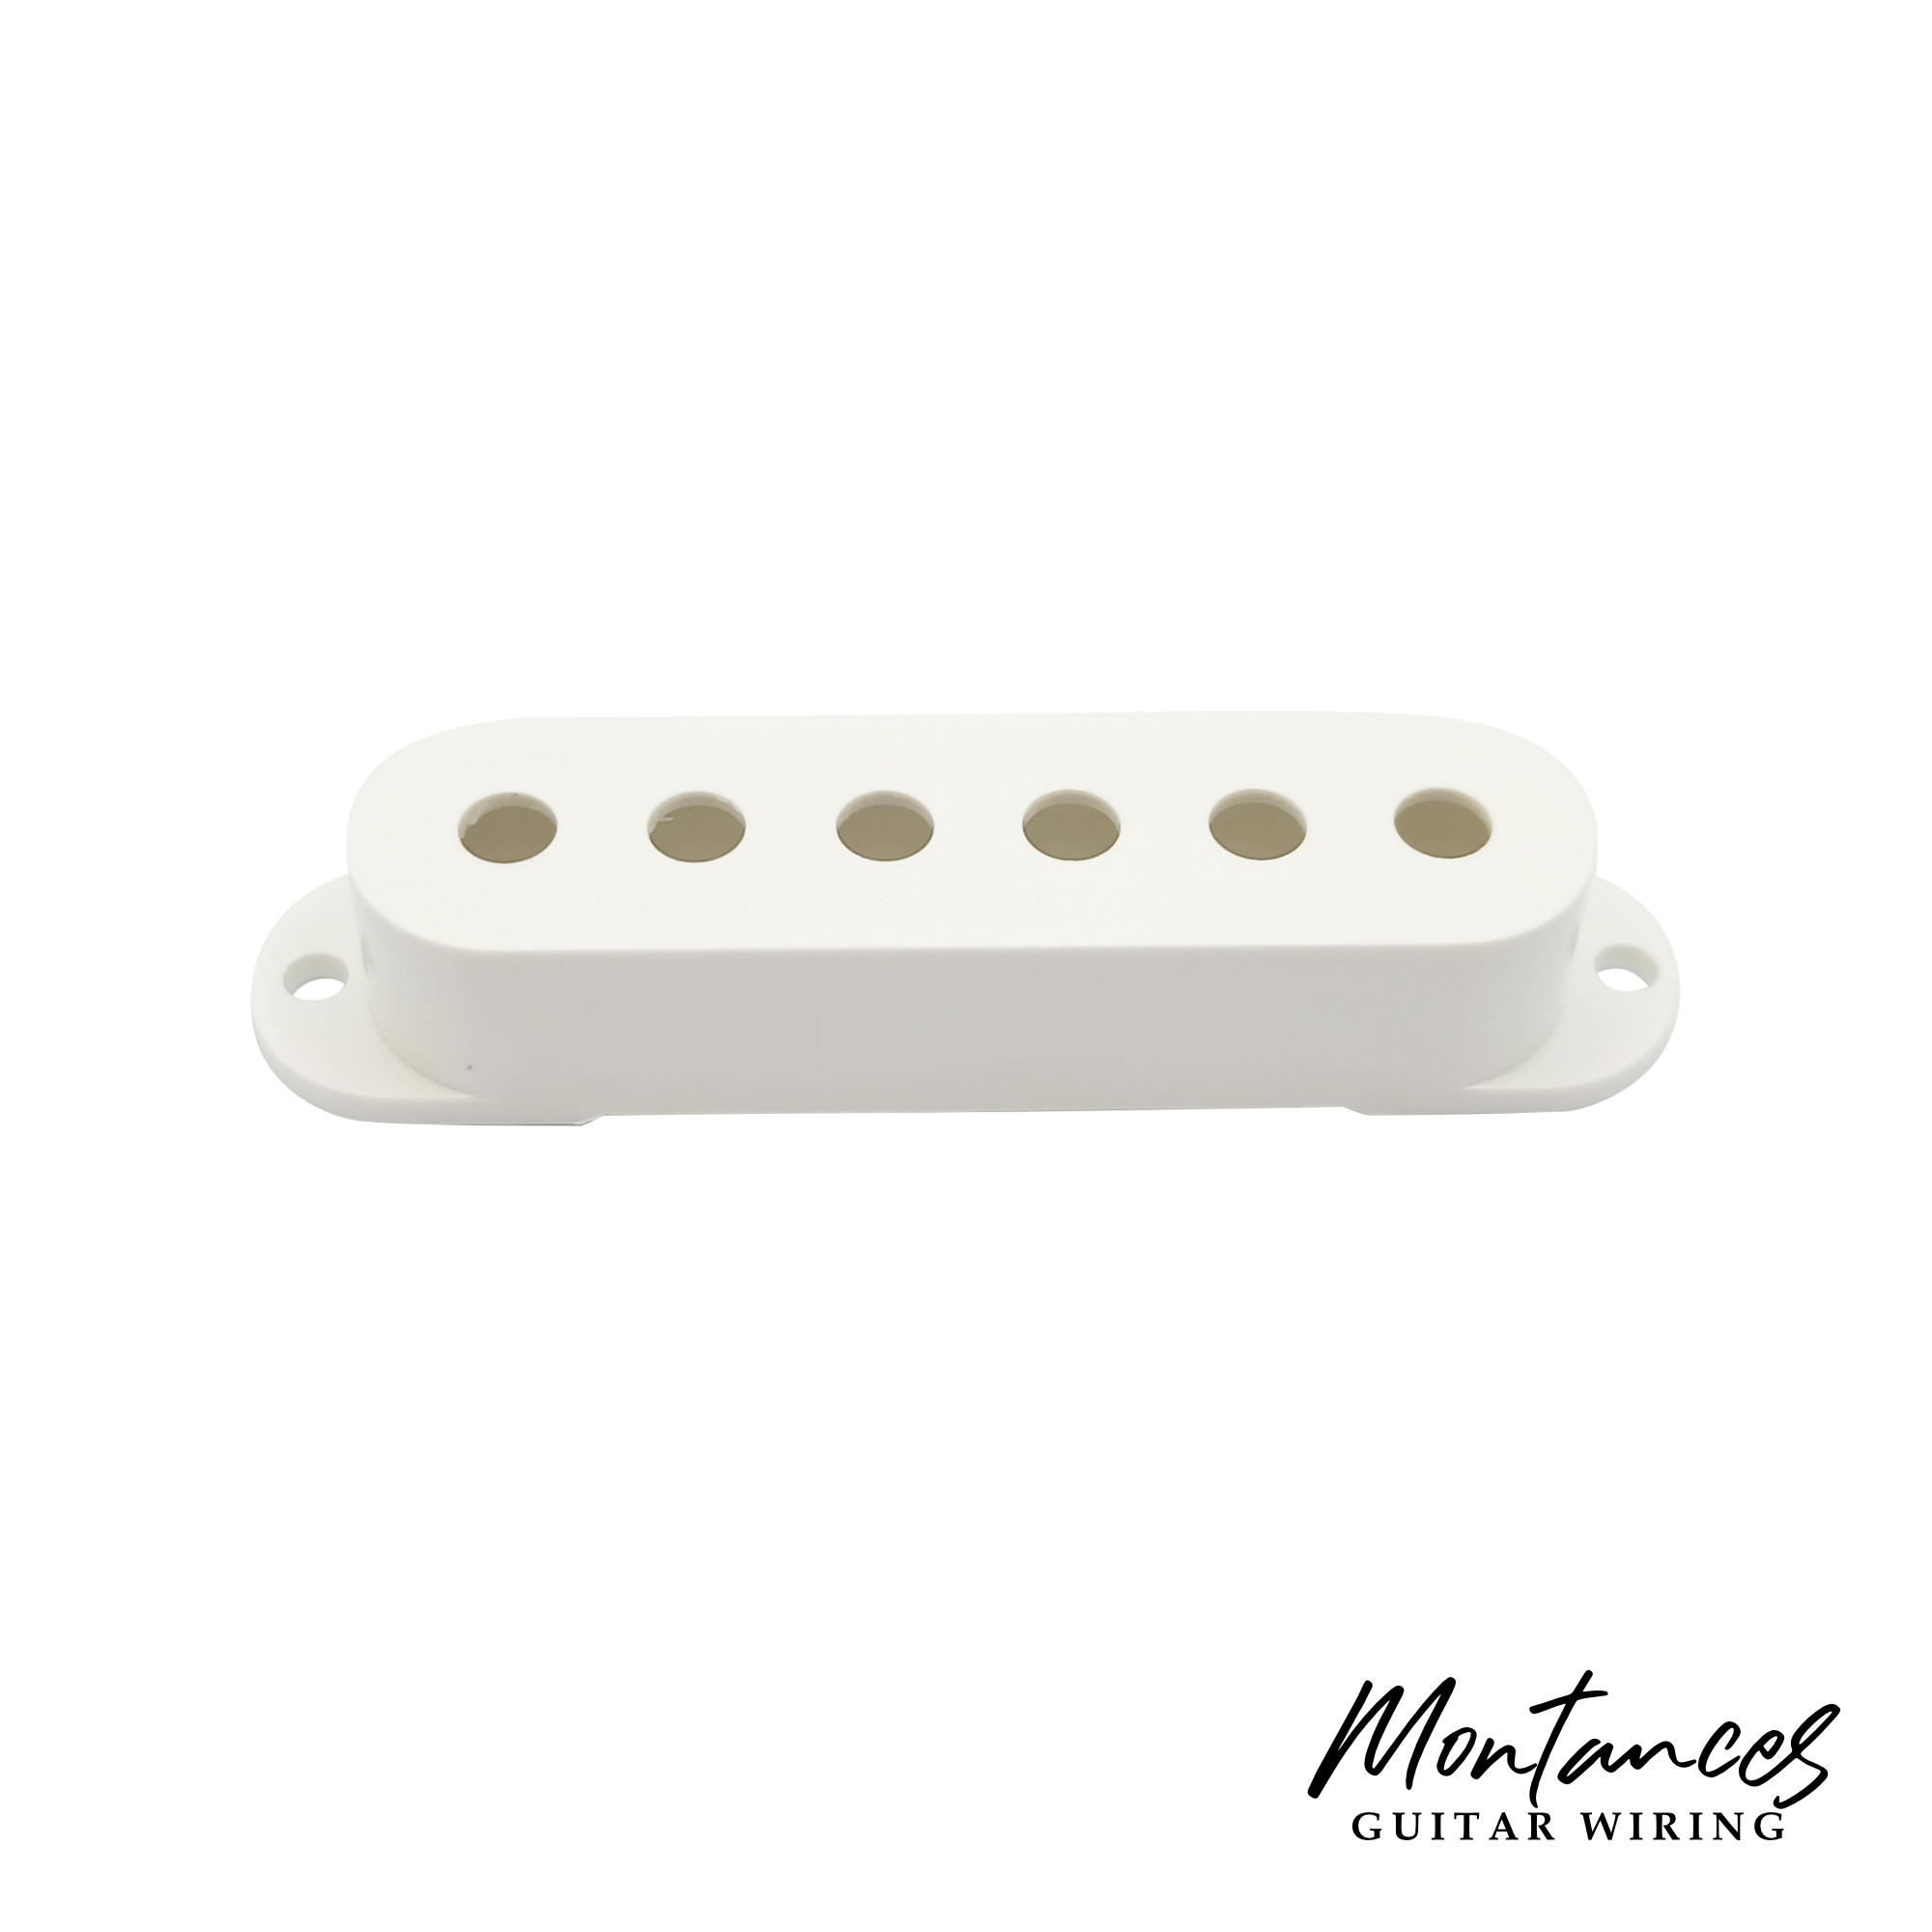 Strat Pickup Cover for Single-Coils 52mm Spacing